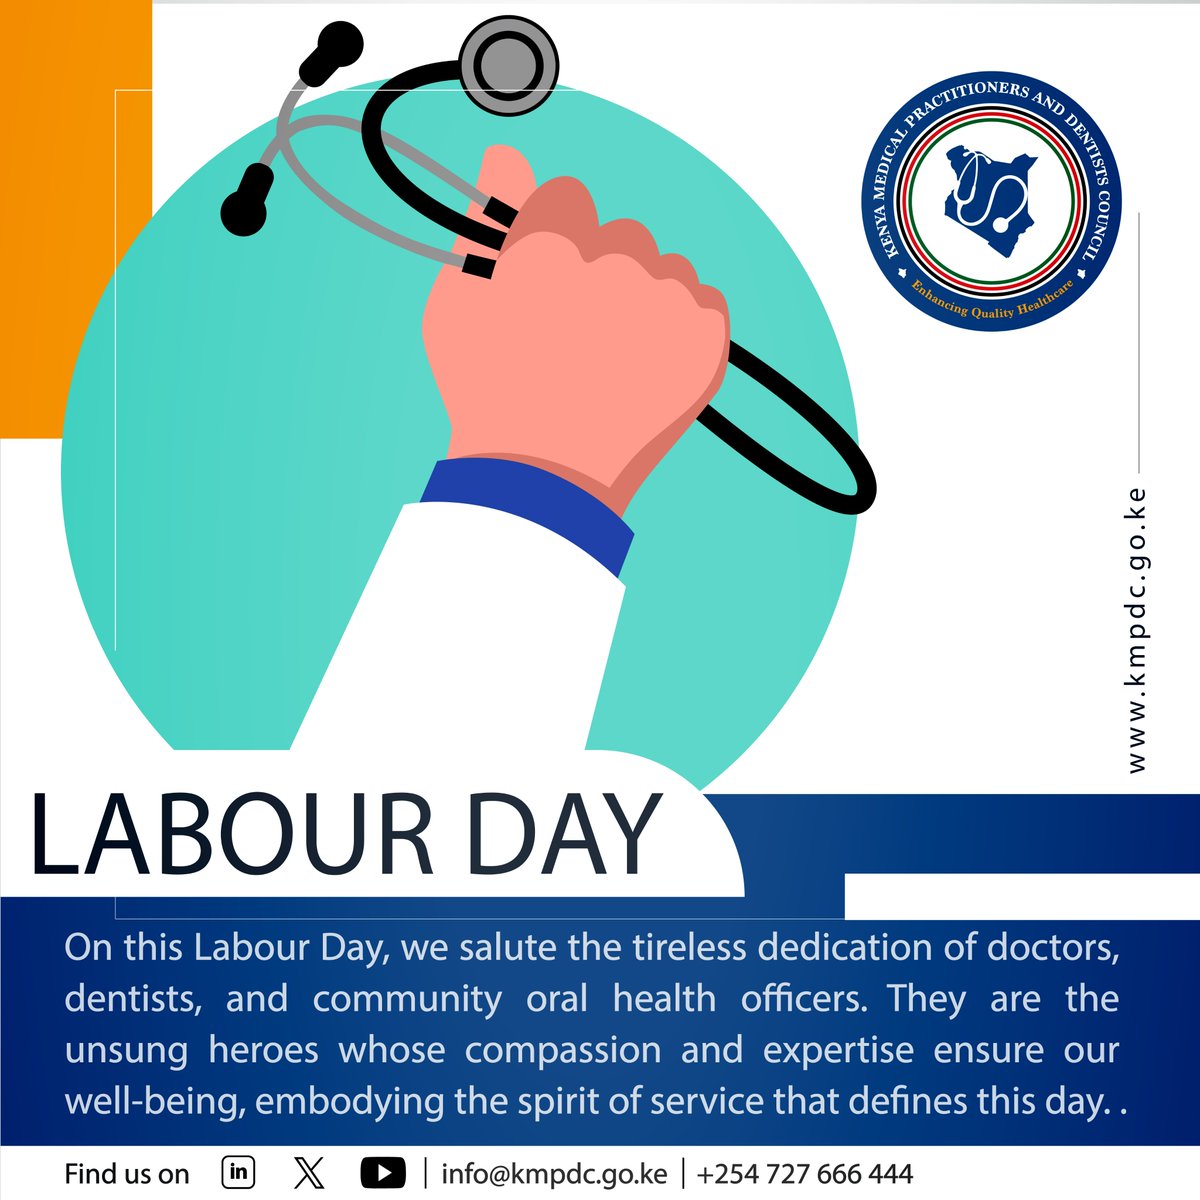 On this Labor Day, we salute the tireless dedication of doctors, dentists, and community oral health officers. They are the unsung heroes whose compassion and expertise ensure our well-being, embodying the spirit of service that defines this day. Thank you for your invaluable